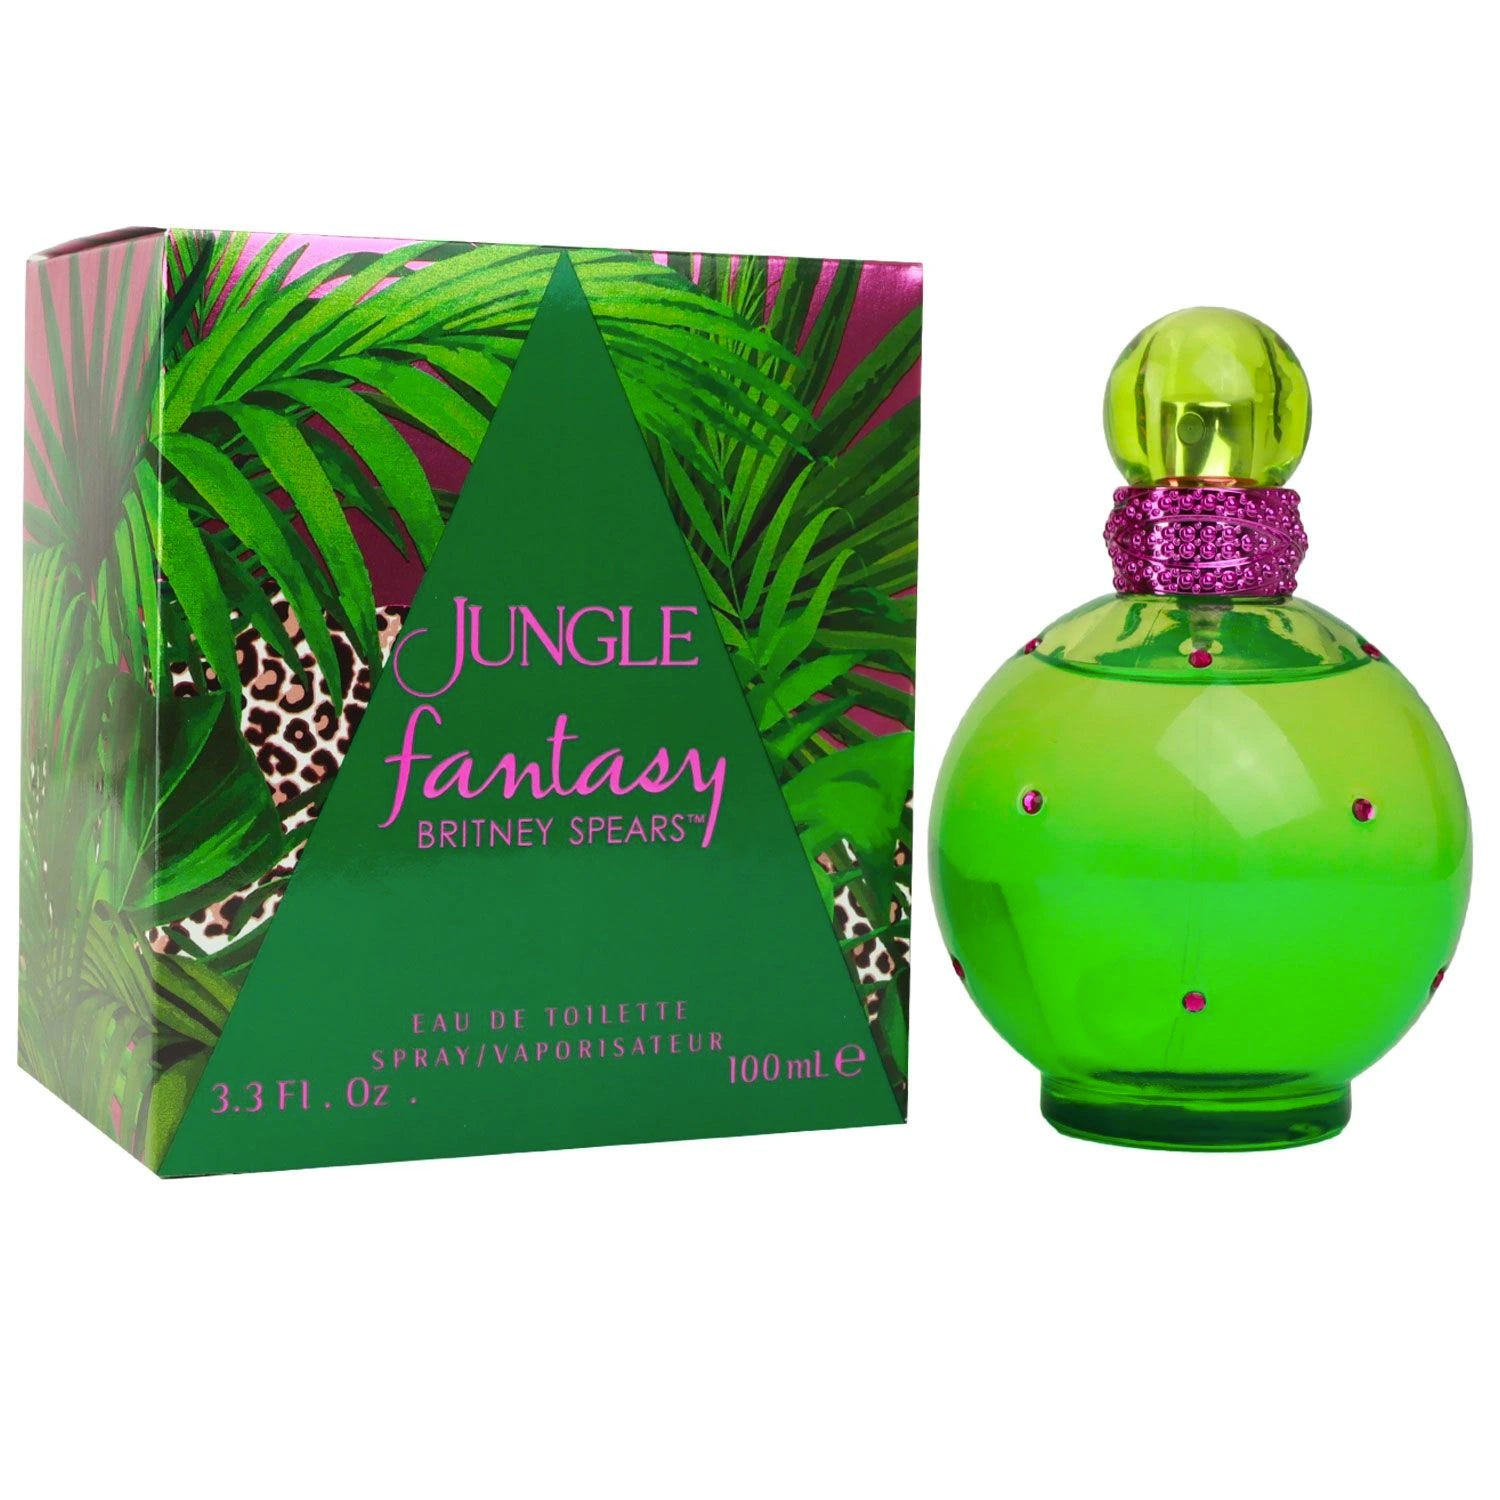 <p>Escape into the unknown with Fantasy Jungle by Britney Spears. Unleash your wild side with this vibrant and free-spirited fragrance, featuring notes of watermelon flowers, Gustavia flowers, and Tonka Bean Absolute. Let your imagination run wild and experience the exotic and refreshing scent of Jungle Fantasy.</p>